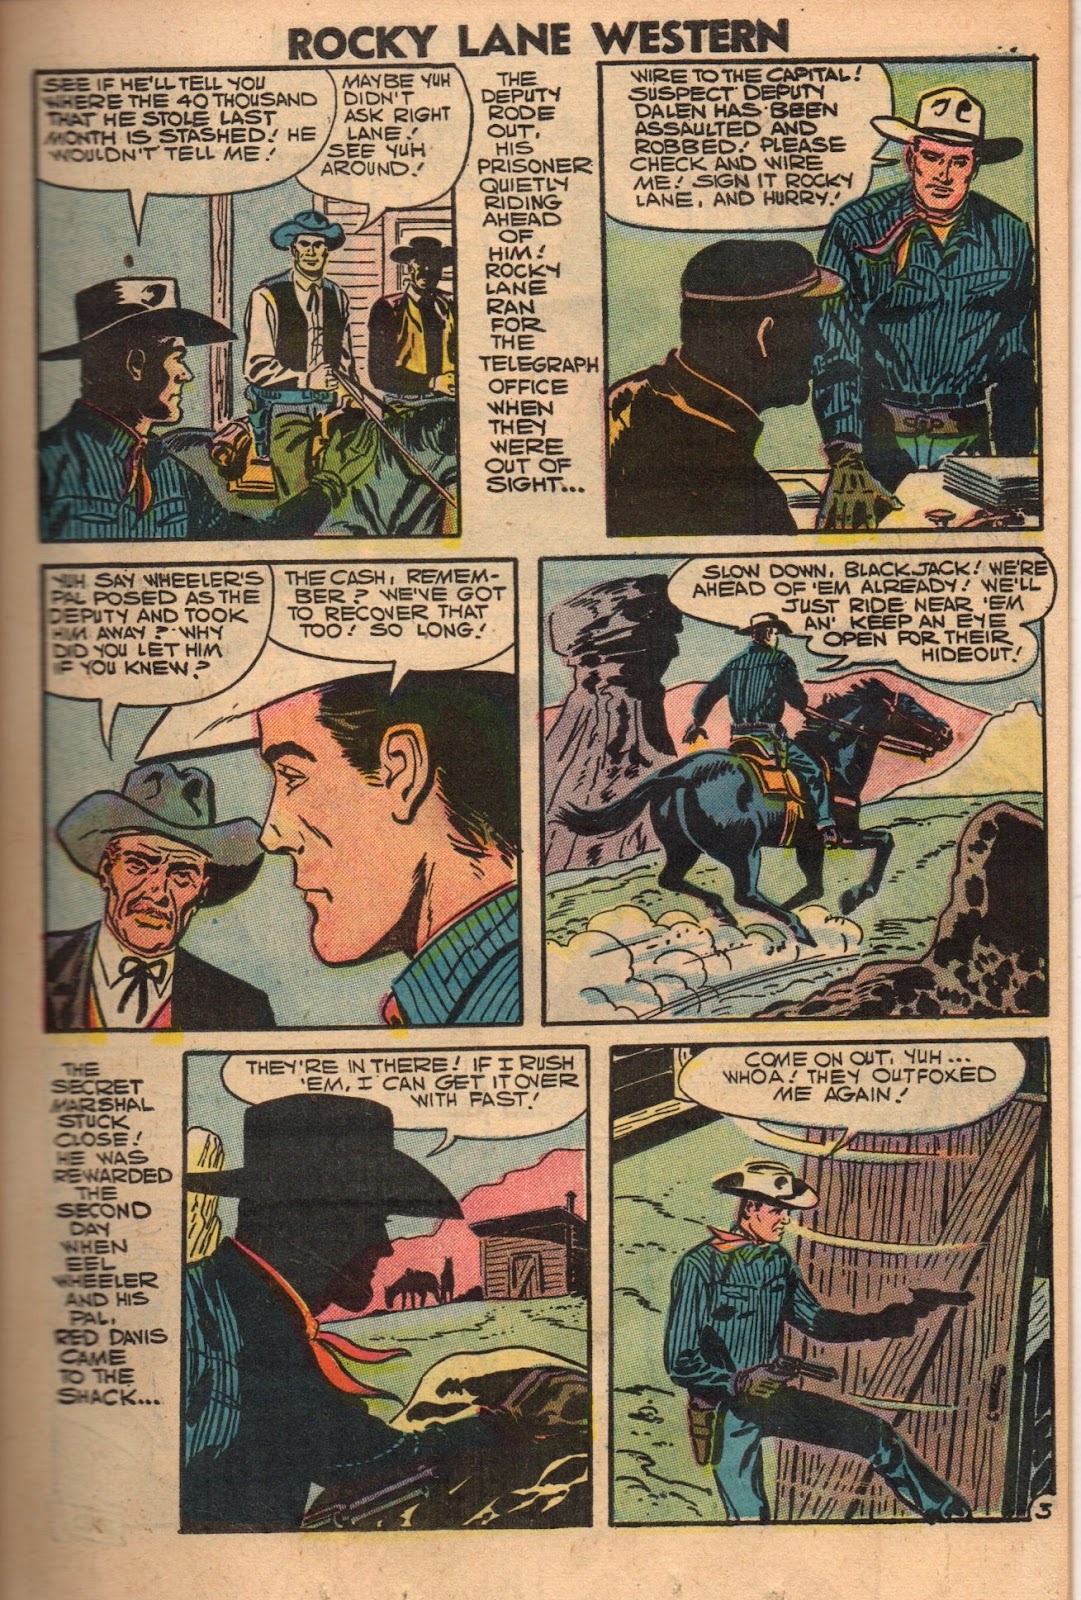 Rocky Lane Western (1954) issue 79 - Page 19